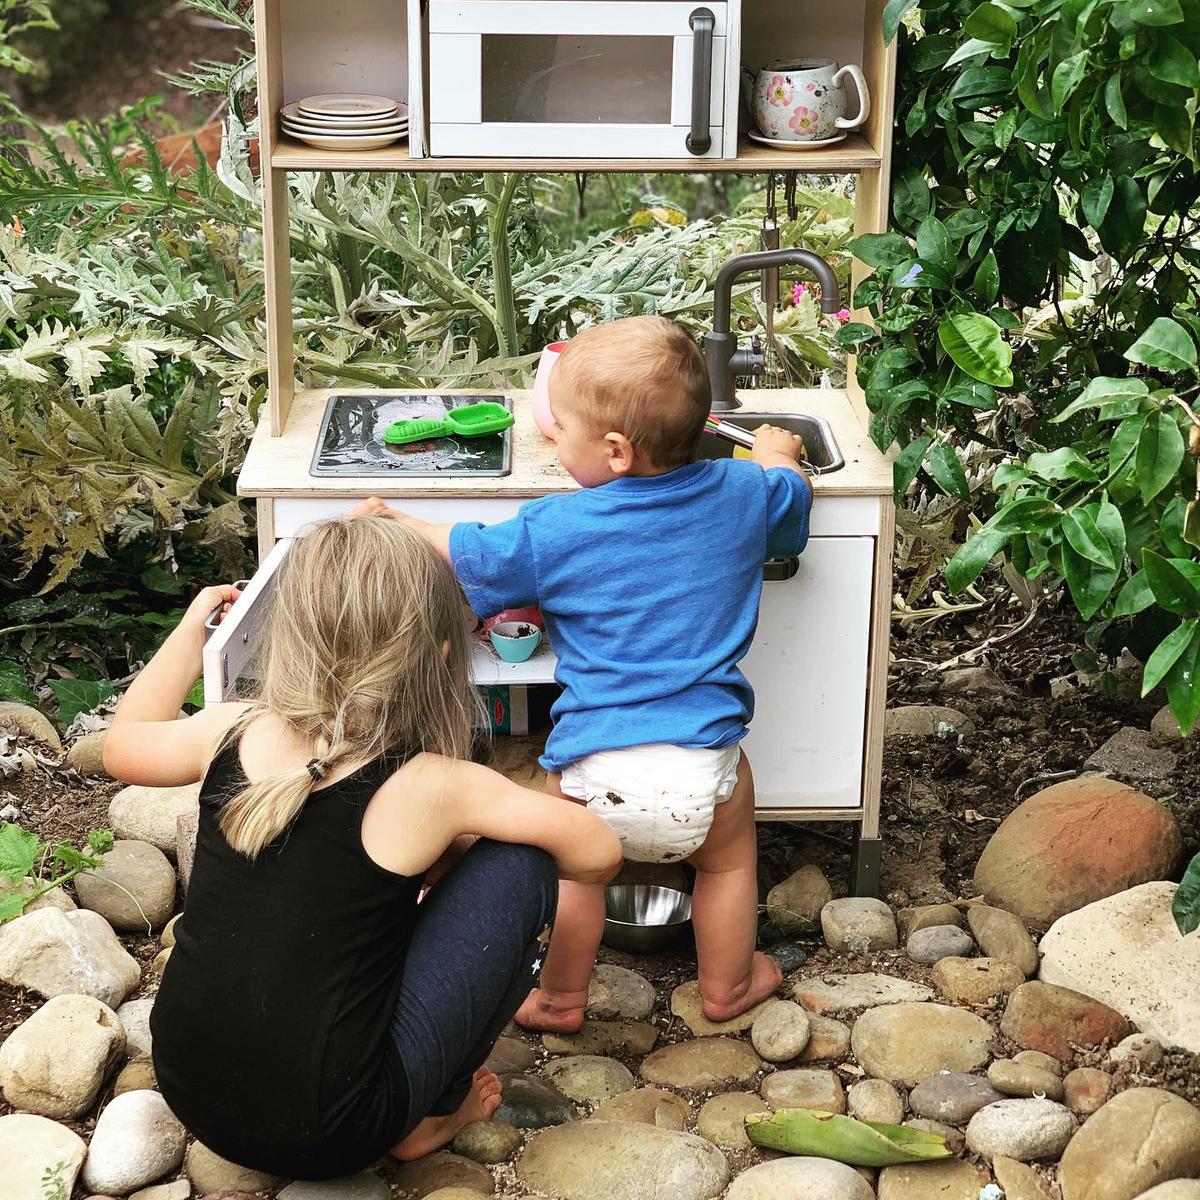 Evelyn and Christopher playing in the "mud kitchen." (Courtesy of <a href="https://www.instagram.com/mykidsaredirtyagain/">Taylor Raine</a>)